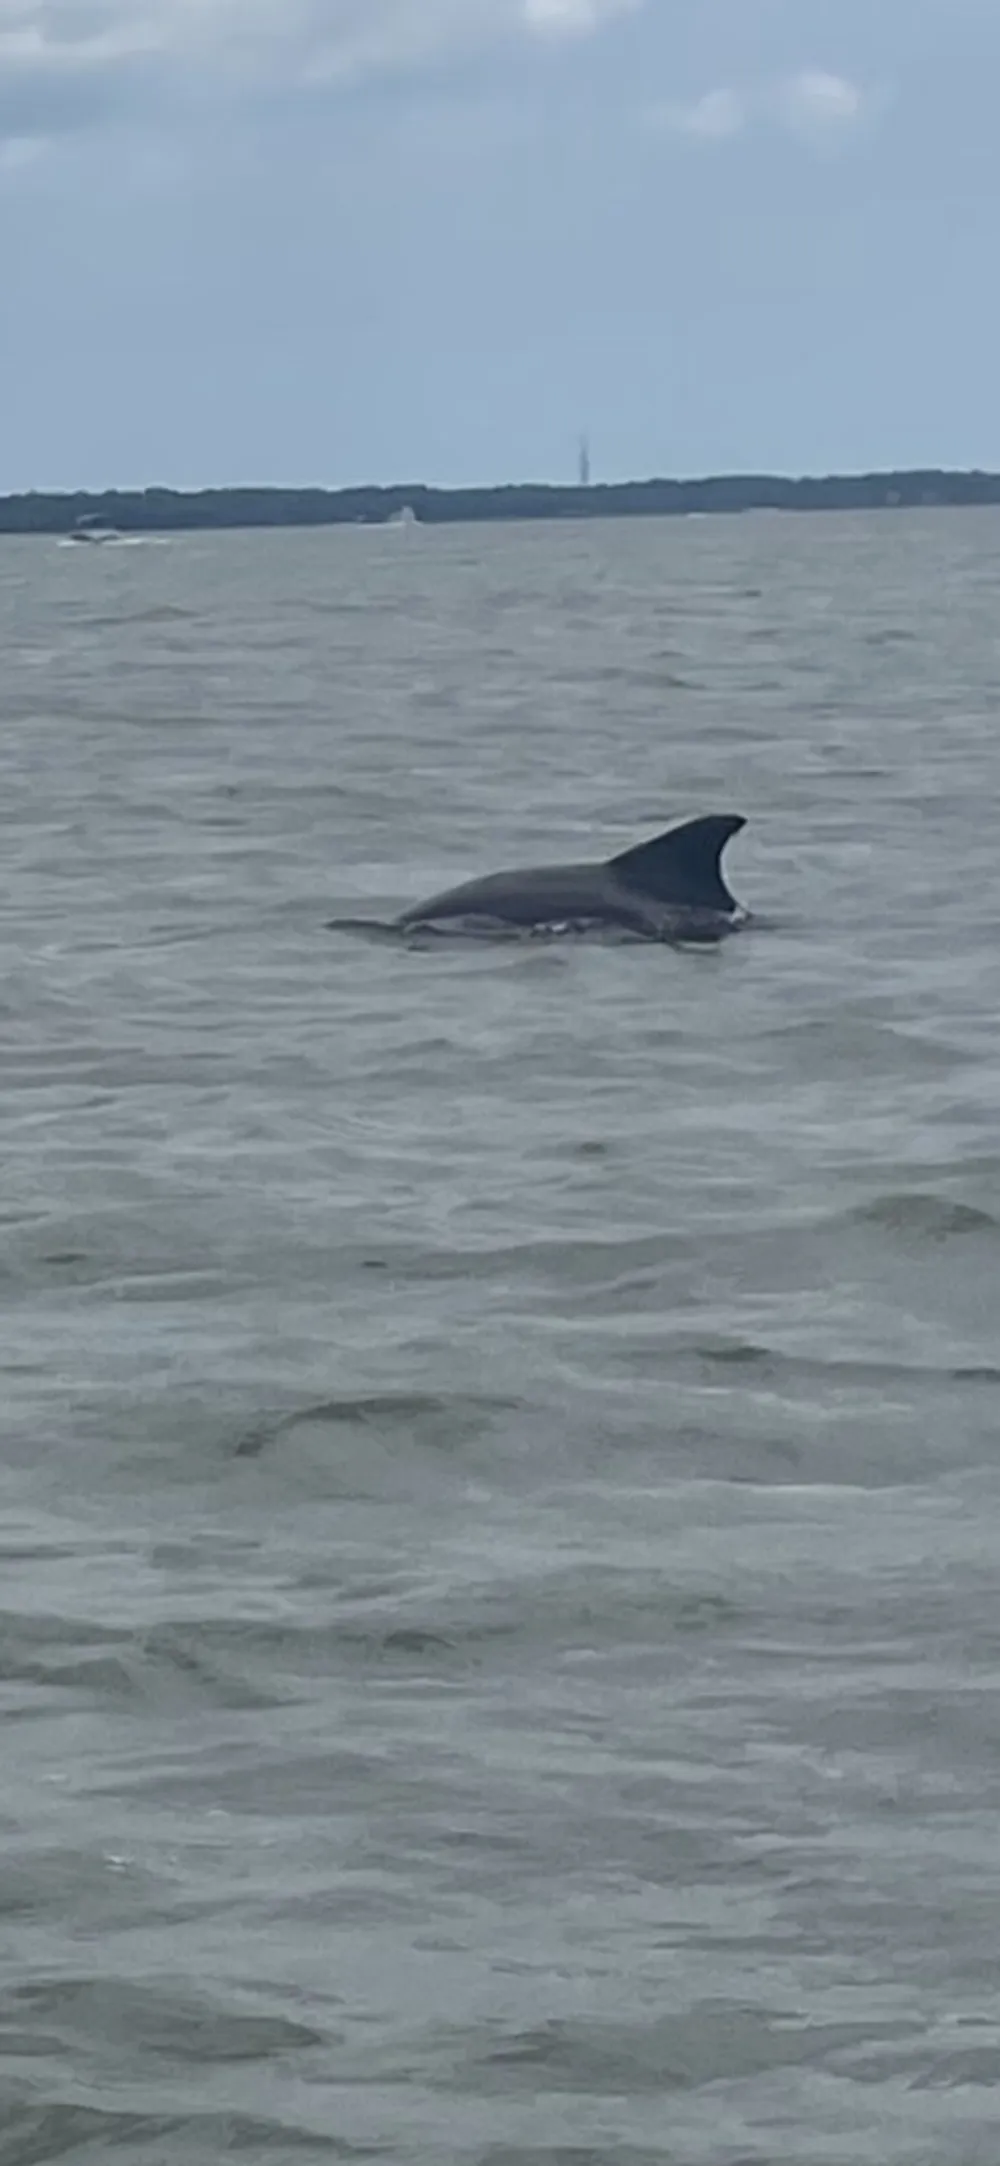 The image shows a dolphins dorsal fin emerging from the surface of the sea